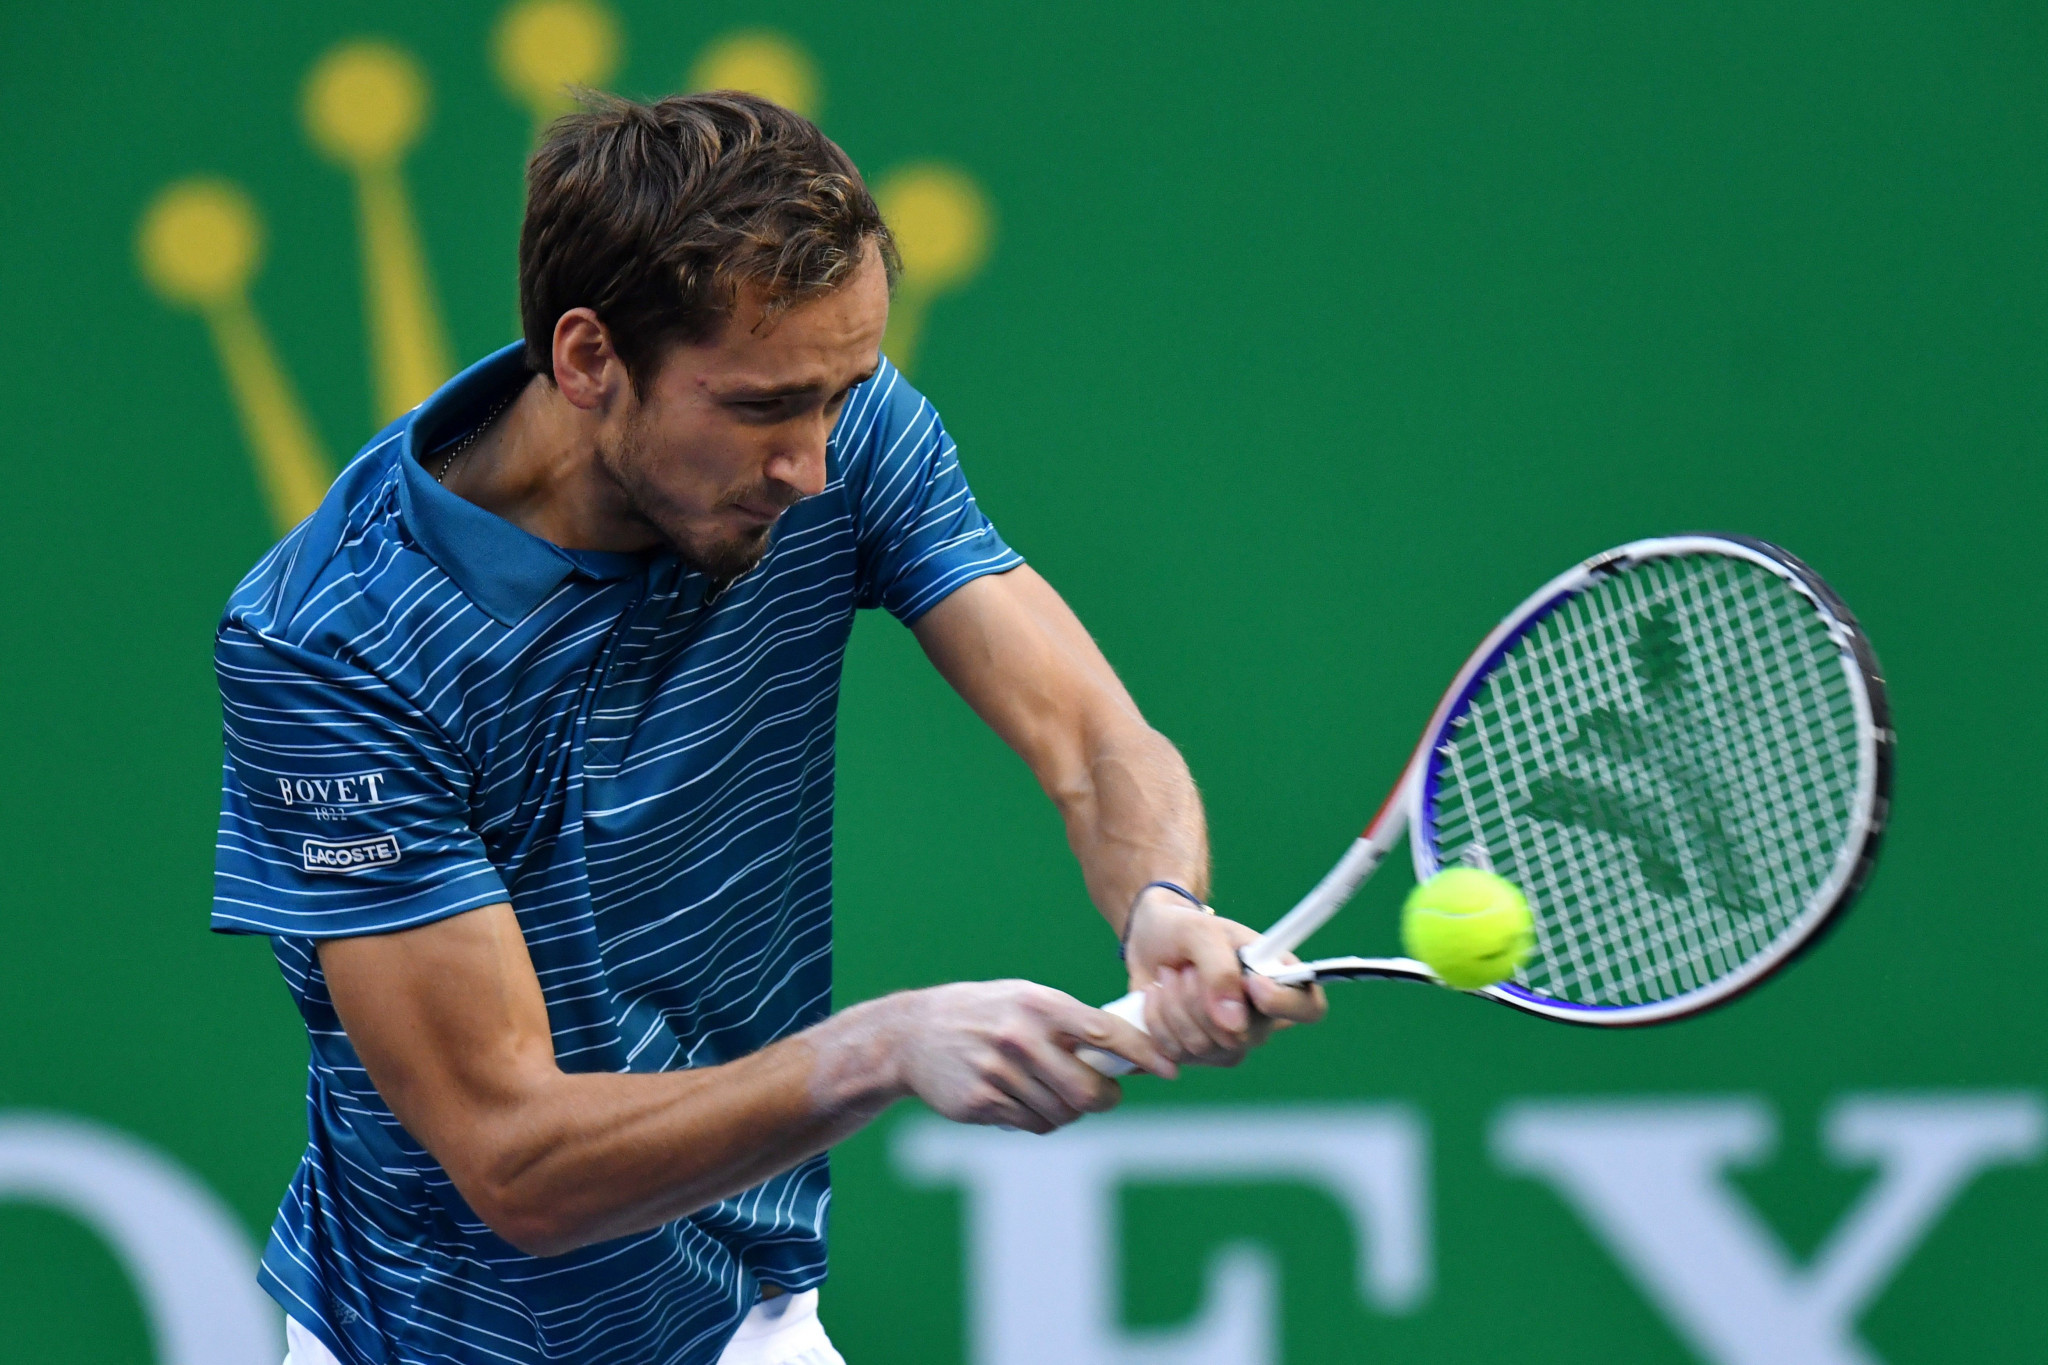 Russia's Daniil Medvedev maintained his superb form to reach the final of the ATP Masters 1000 tournament in Shanghai ©Getty Images